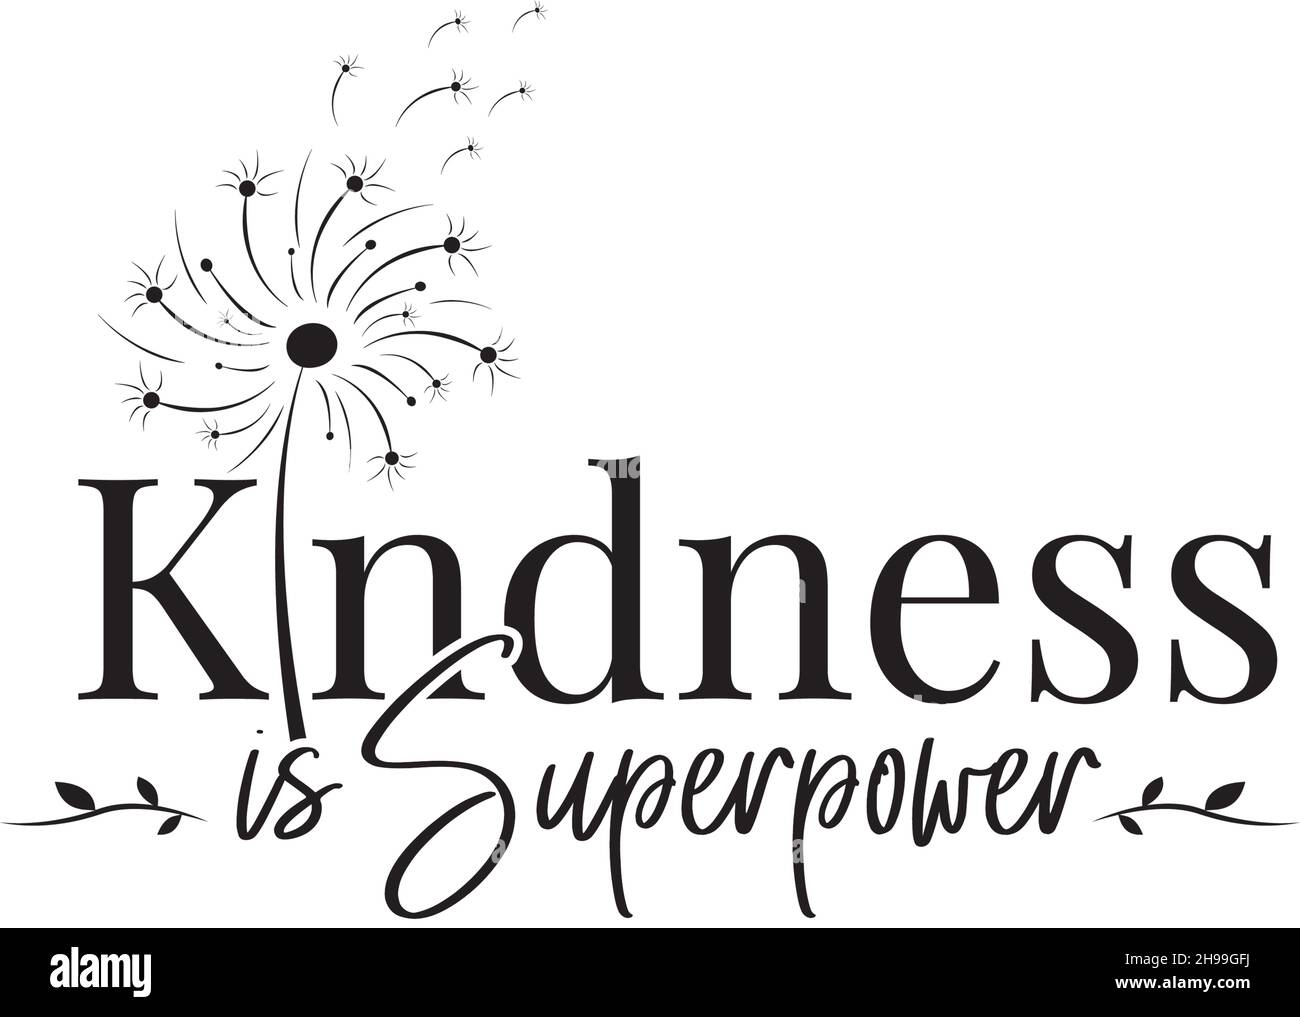 Kindness is a superpower, vector. Motivational inspirational positive quotes. Wording design isolated on white background, lettering. Wall art, artwor Stock Vector